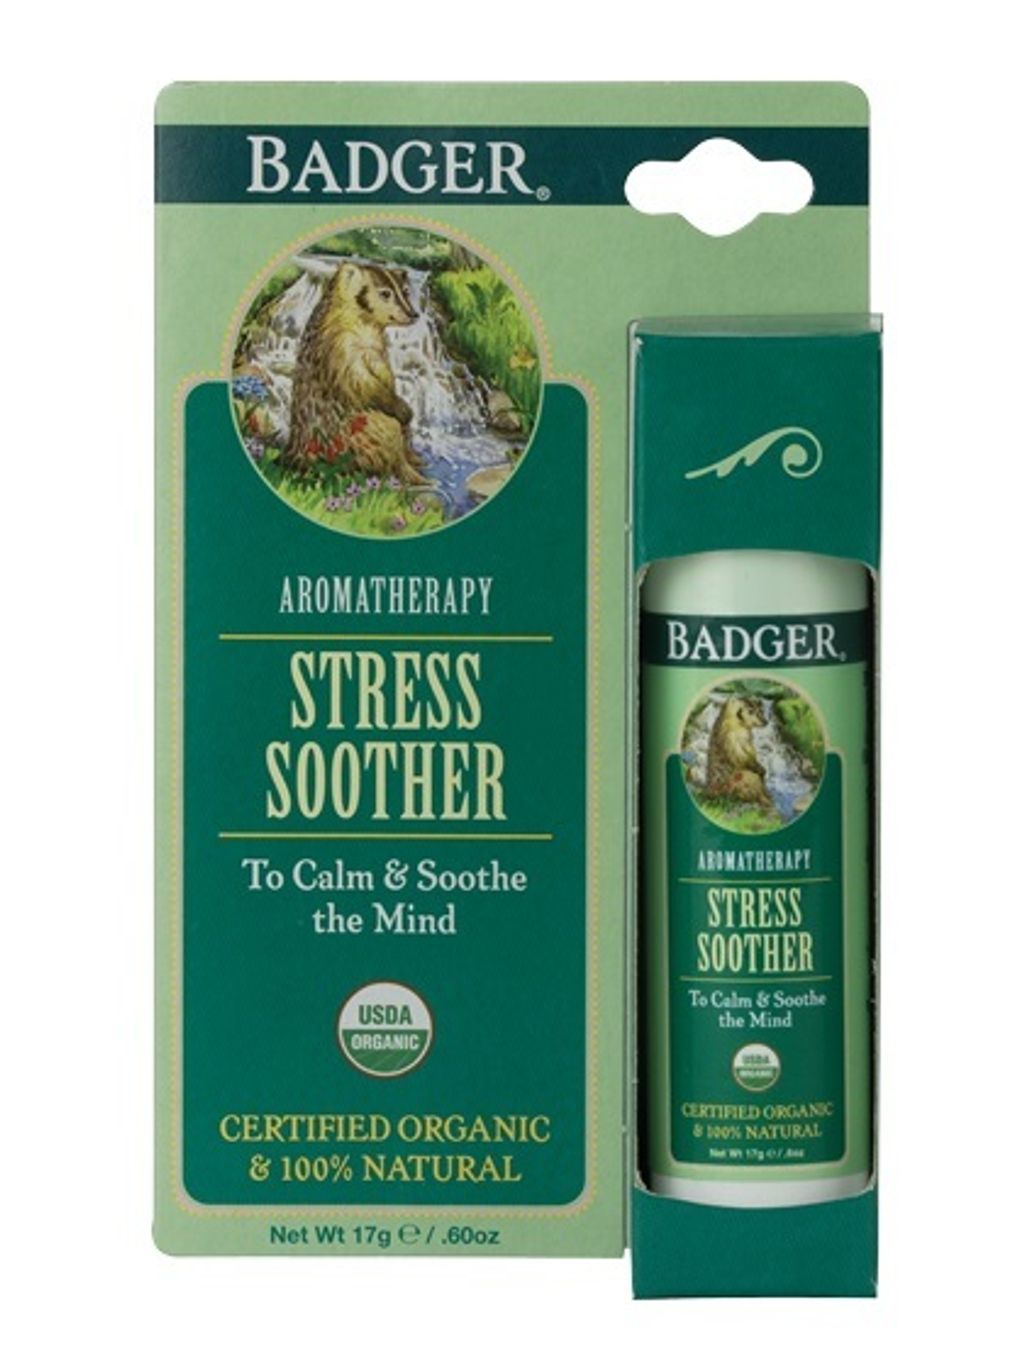 badger-stress-soother-aromatherapy-stick.jpg